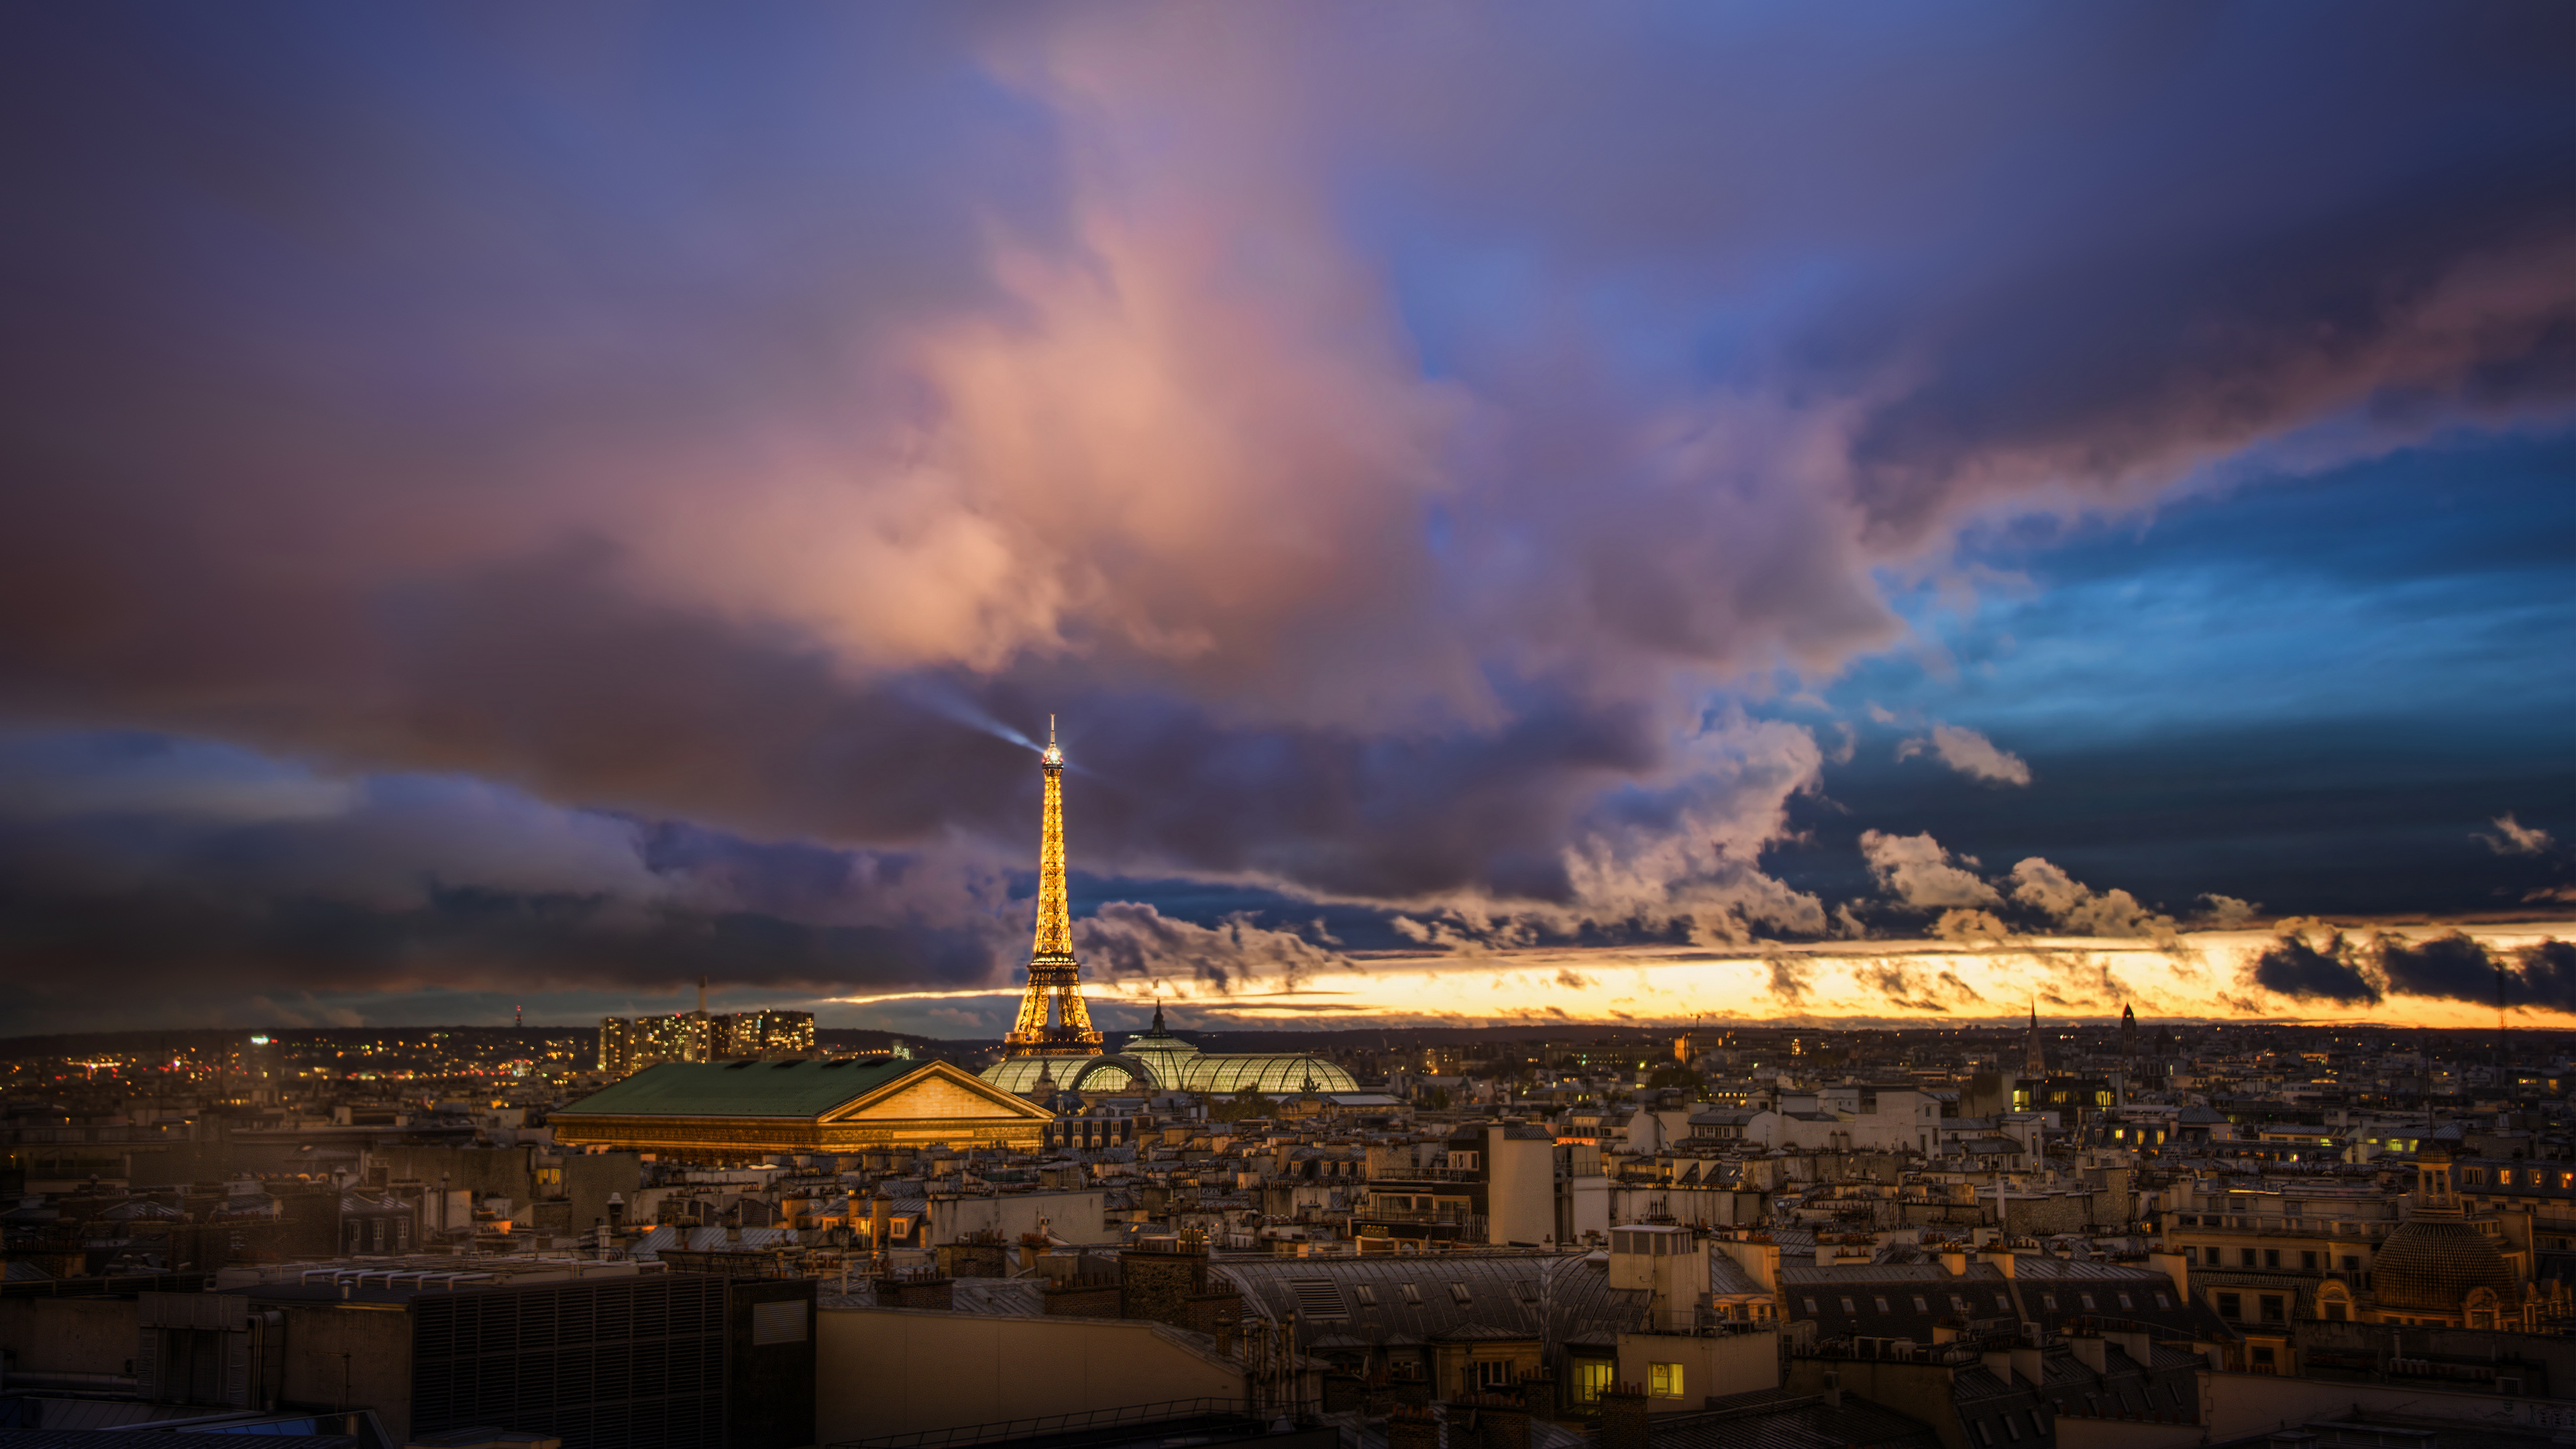 General 3840x2160 Trey Ratcliff photography 4K France city Eiffel Tower clouds